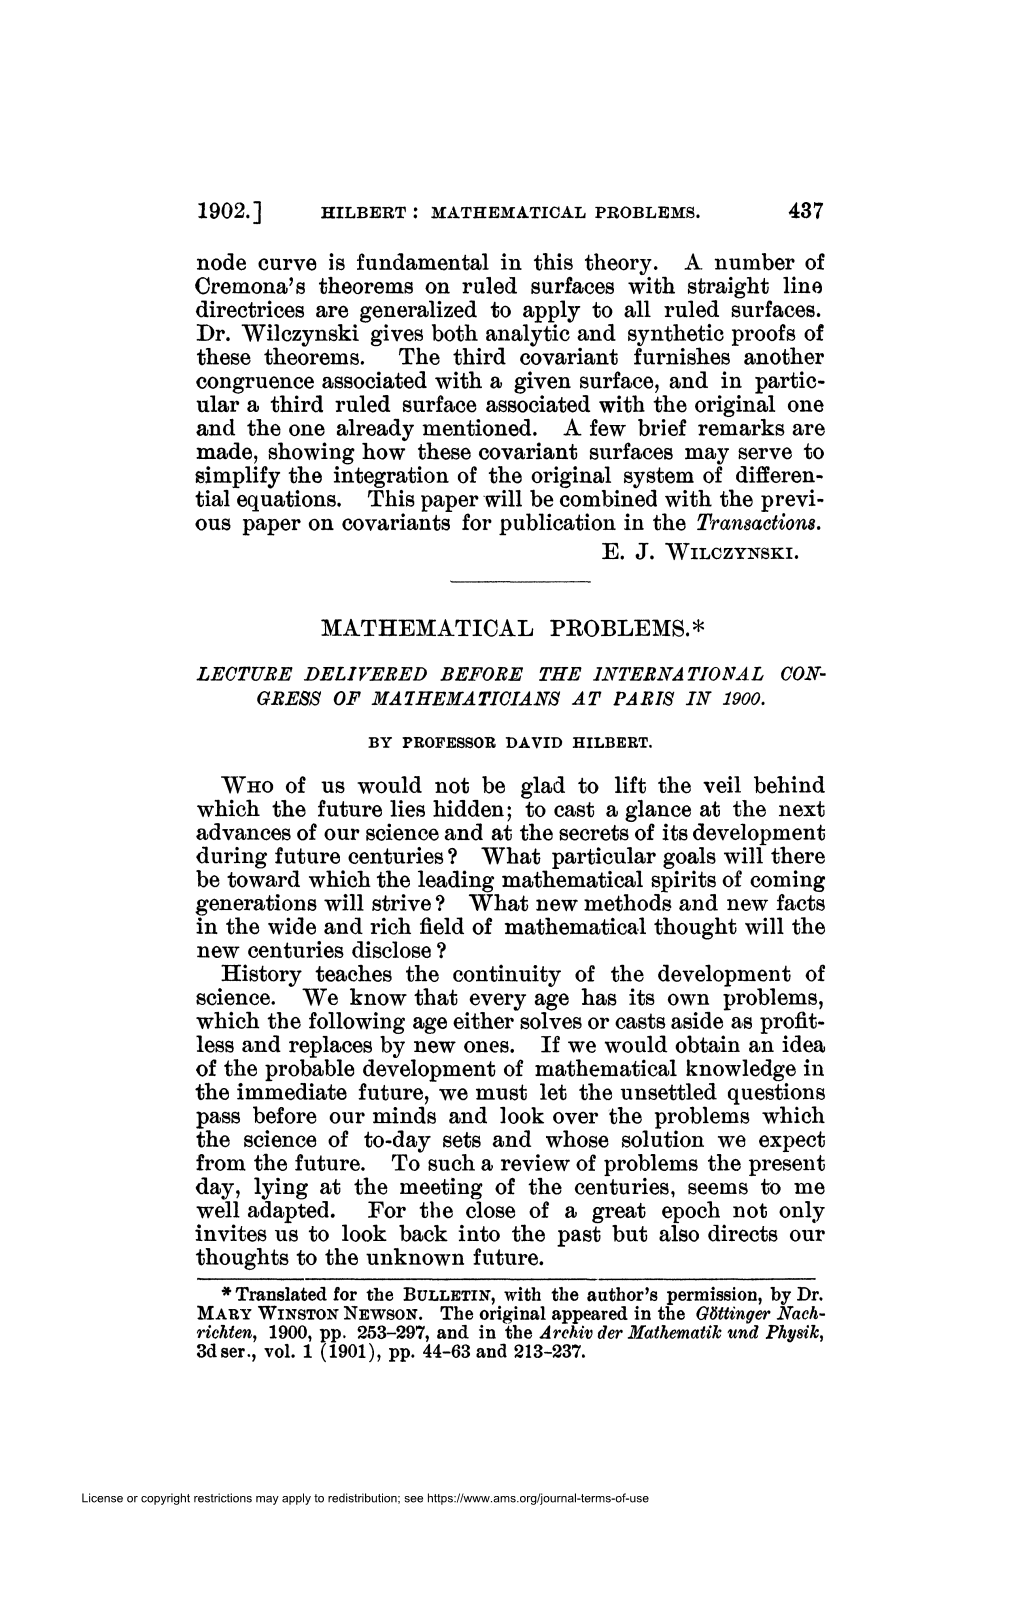 1902.] HILBERT : MATHEMATICAL PROBLEMS. 437 Node Curve Is Fundamental in This Theory. a Number of Cremona's Theorems on Ruled Su